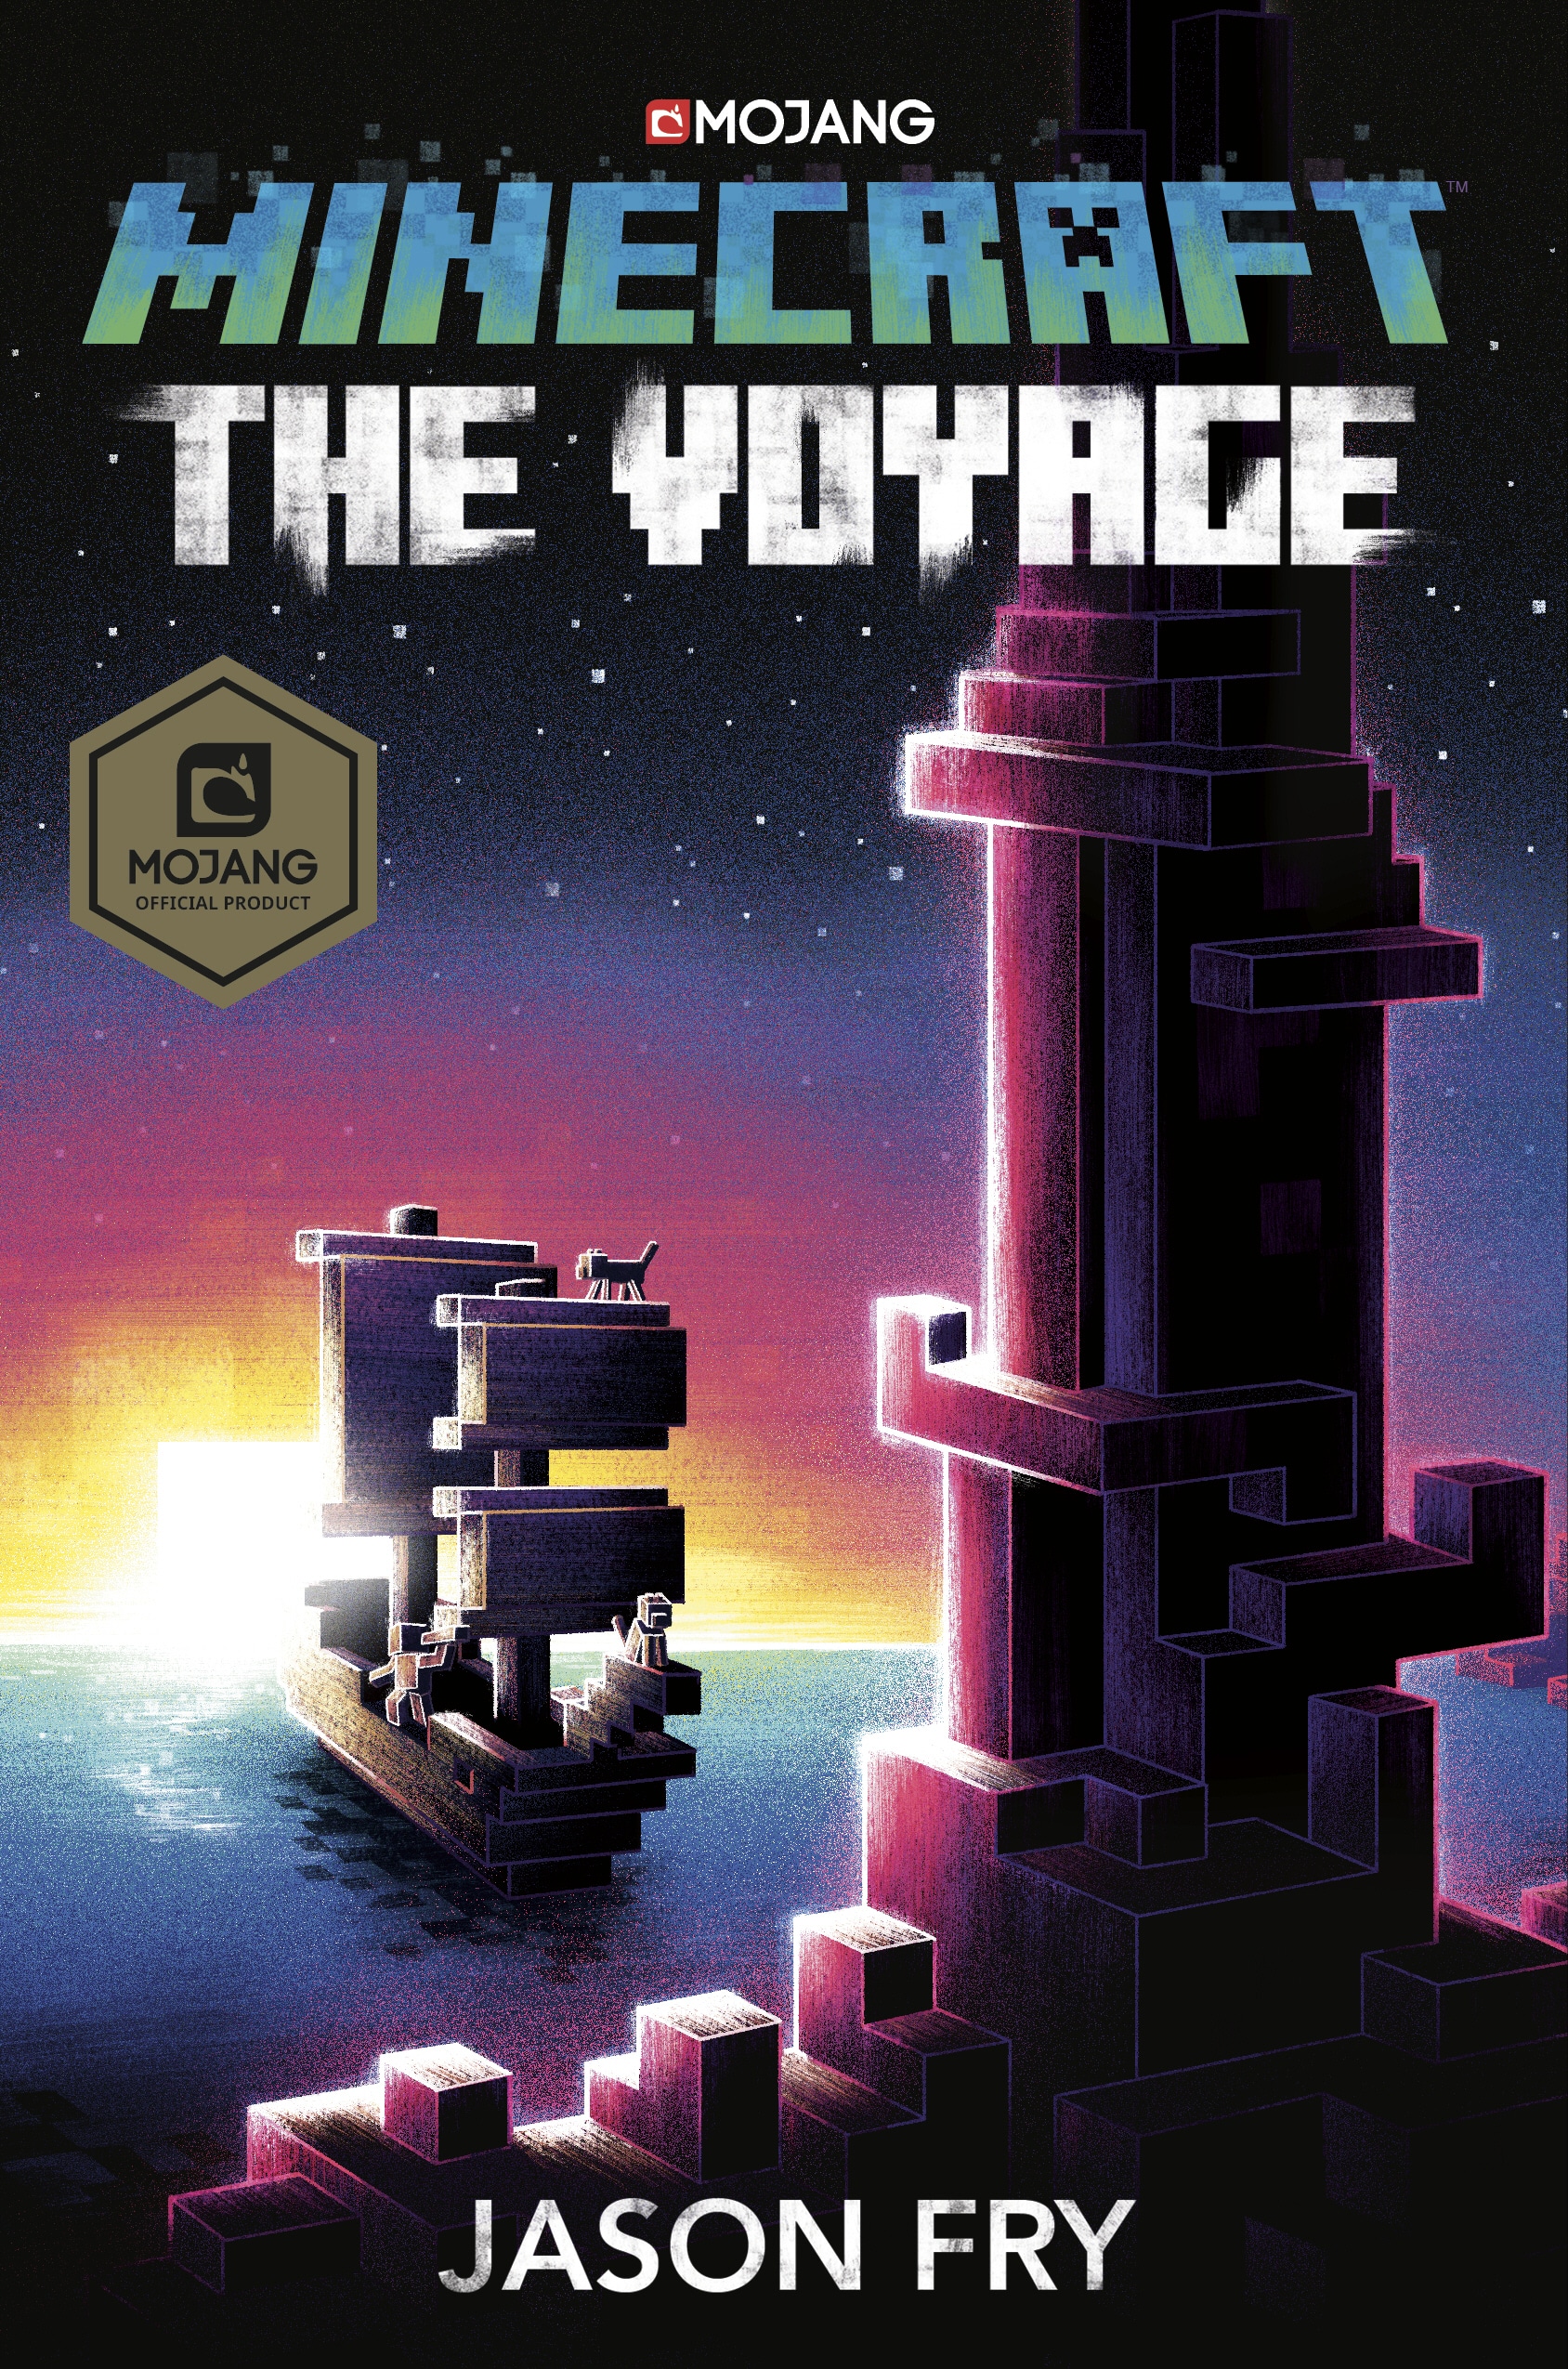 Book “Minecraft: The Voyage” by Jason Fry — May 7, 2020